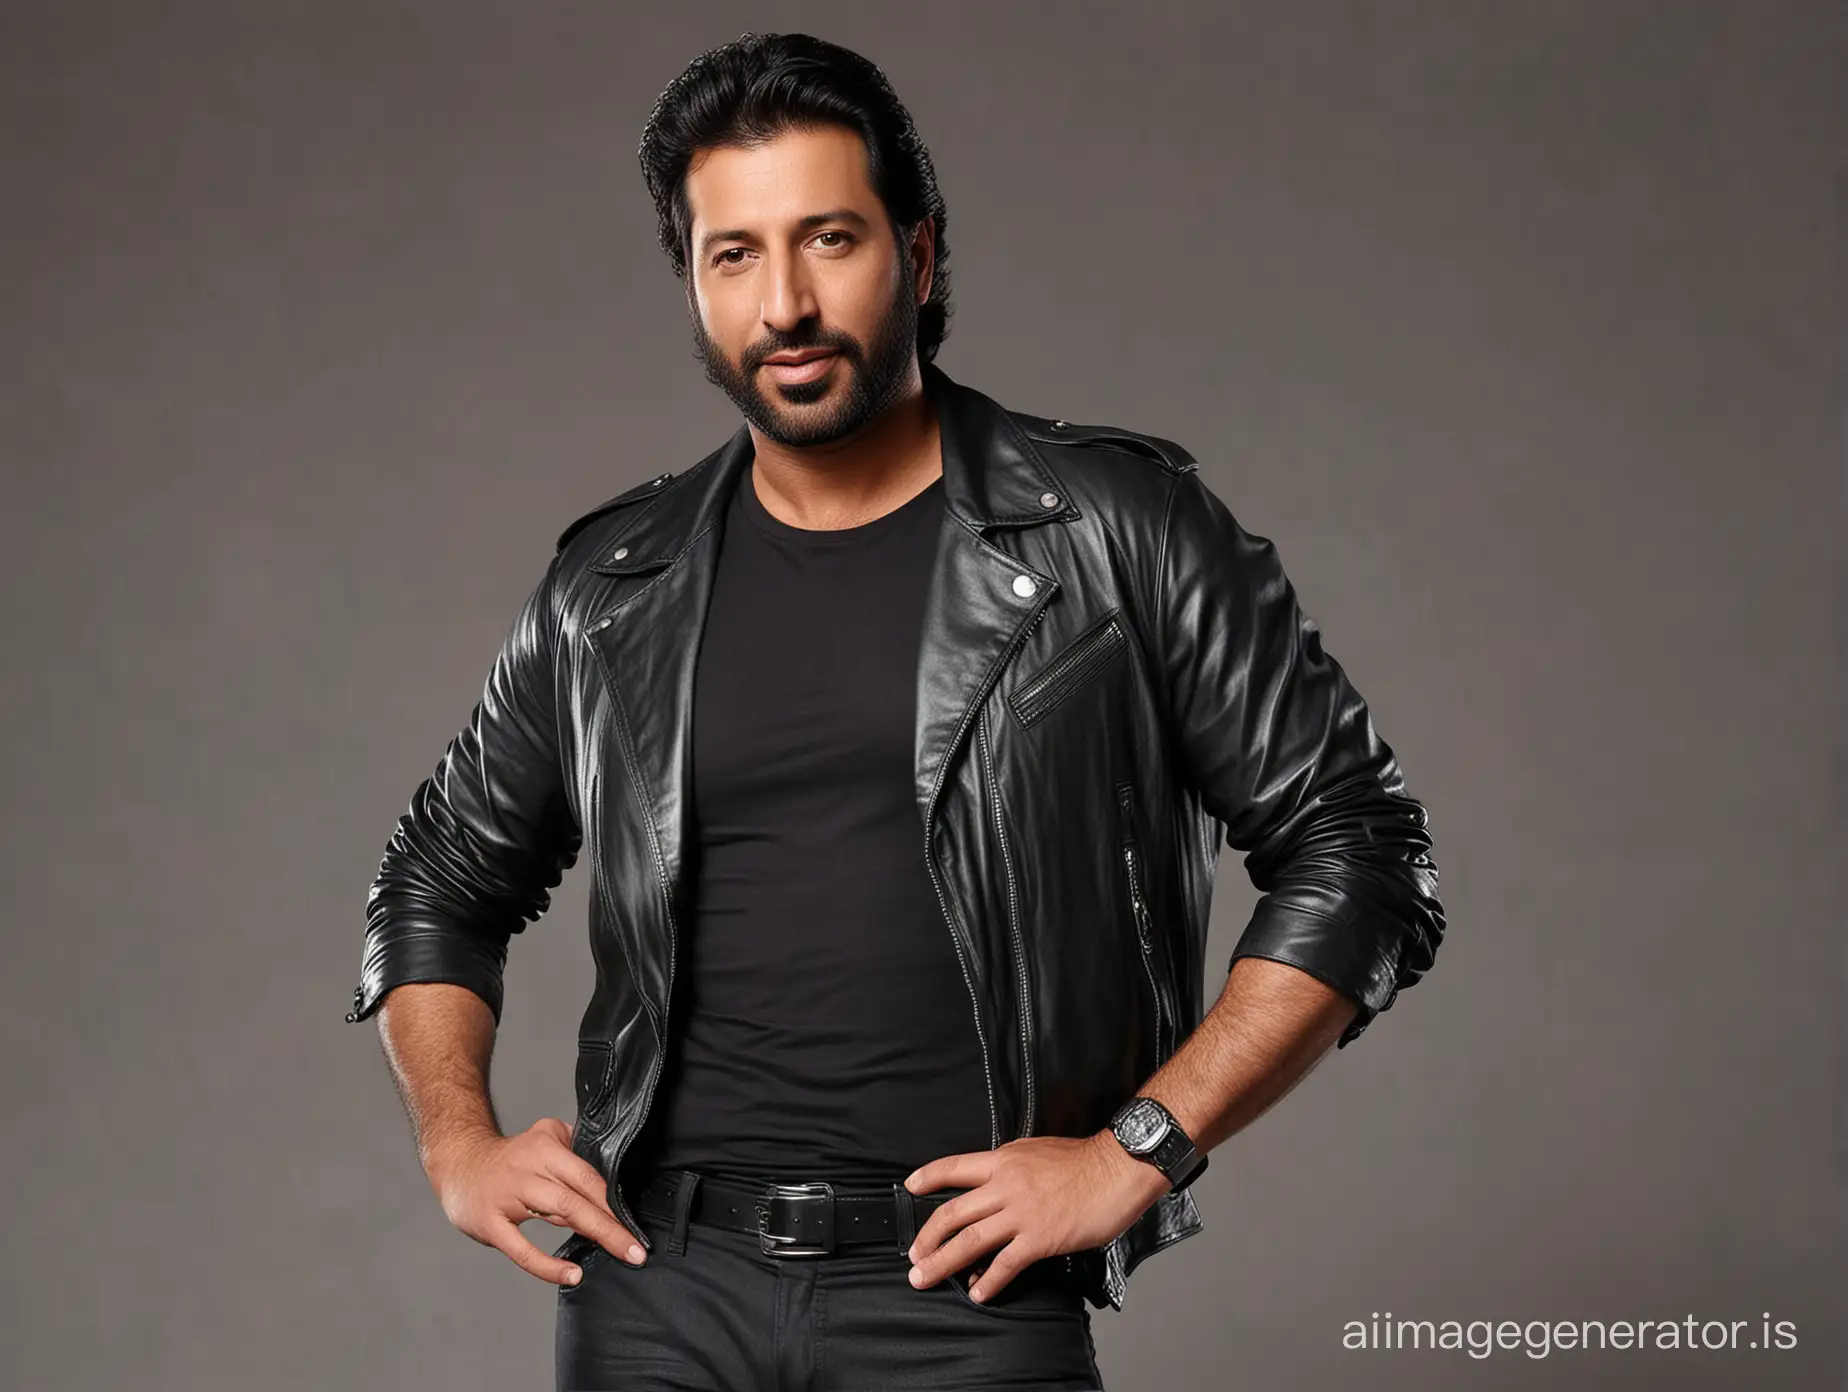 Hot-and-Sexy-Bearded-Wasim-Akram-in-Leather-Jacket